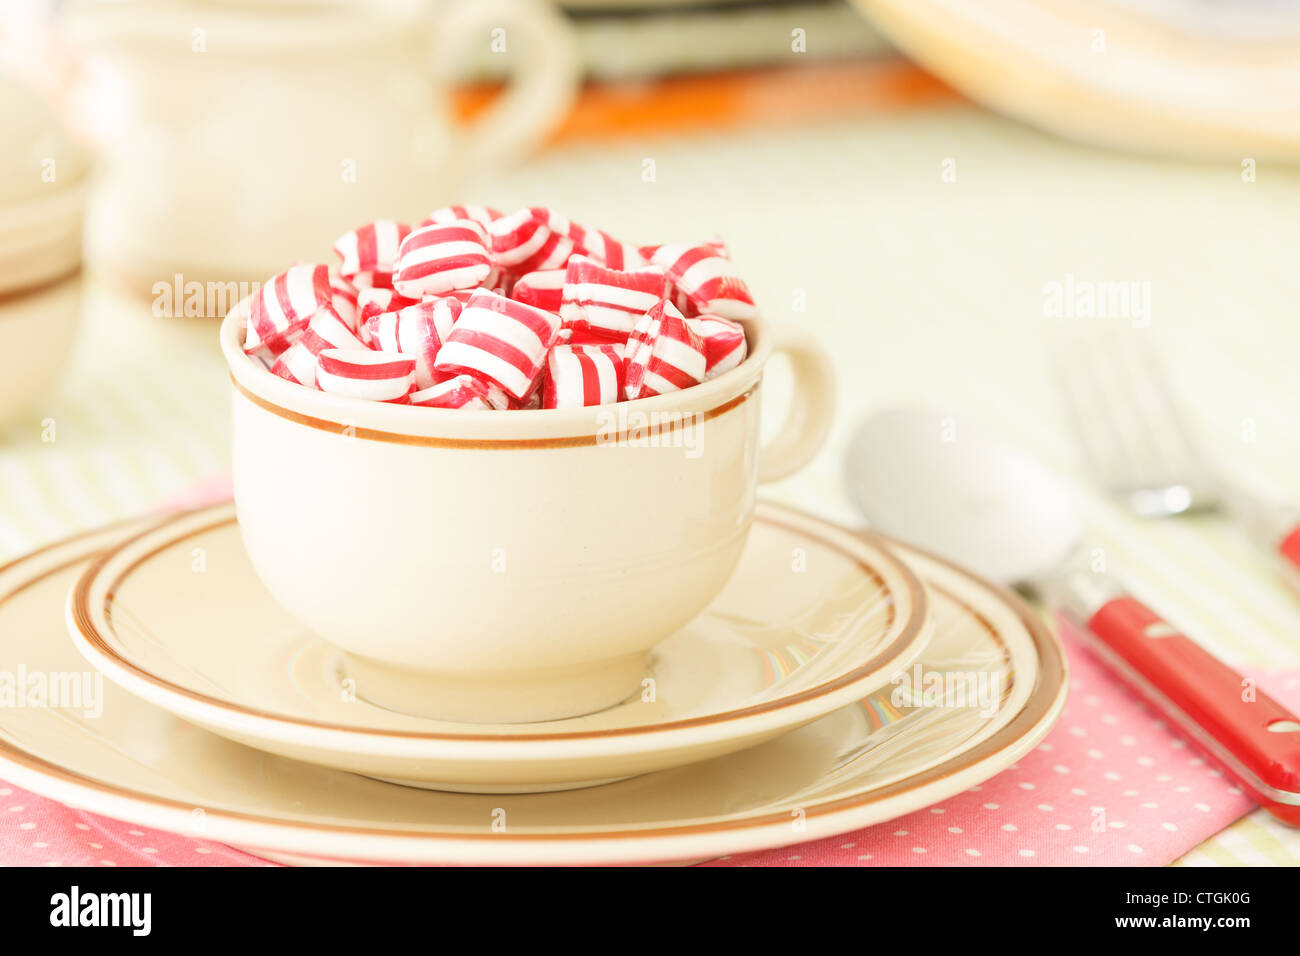 Candies in a teacup on the table Stock Photo